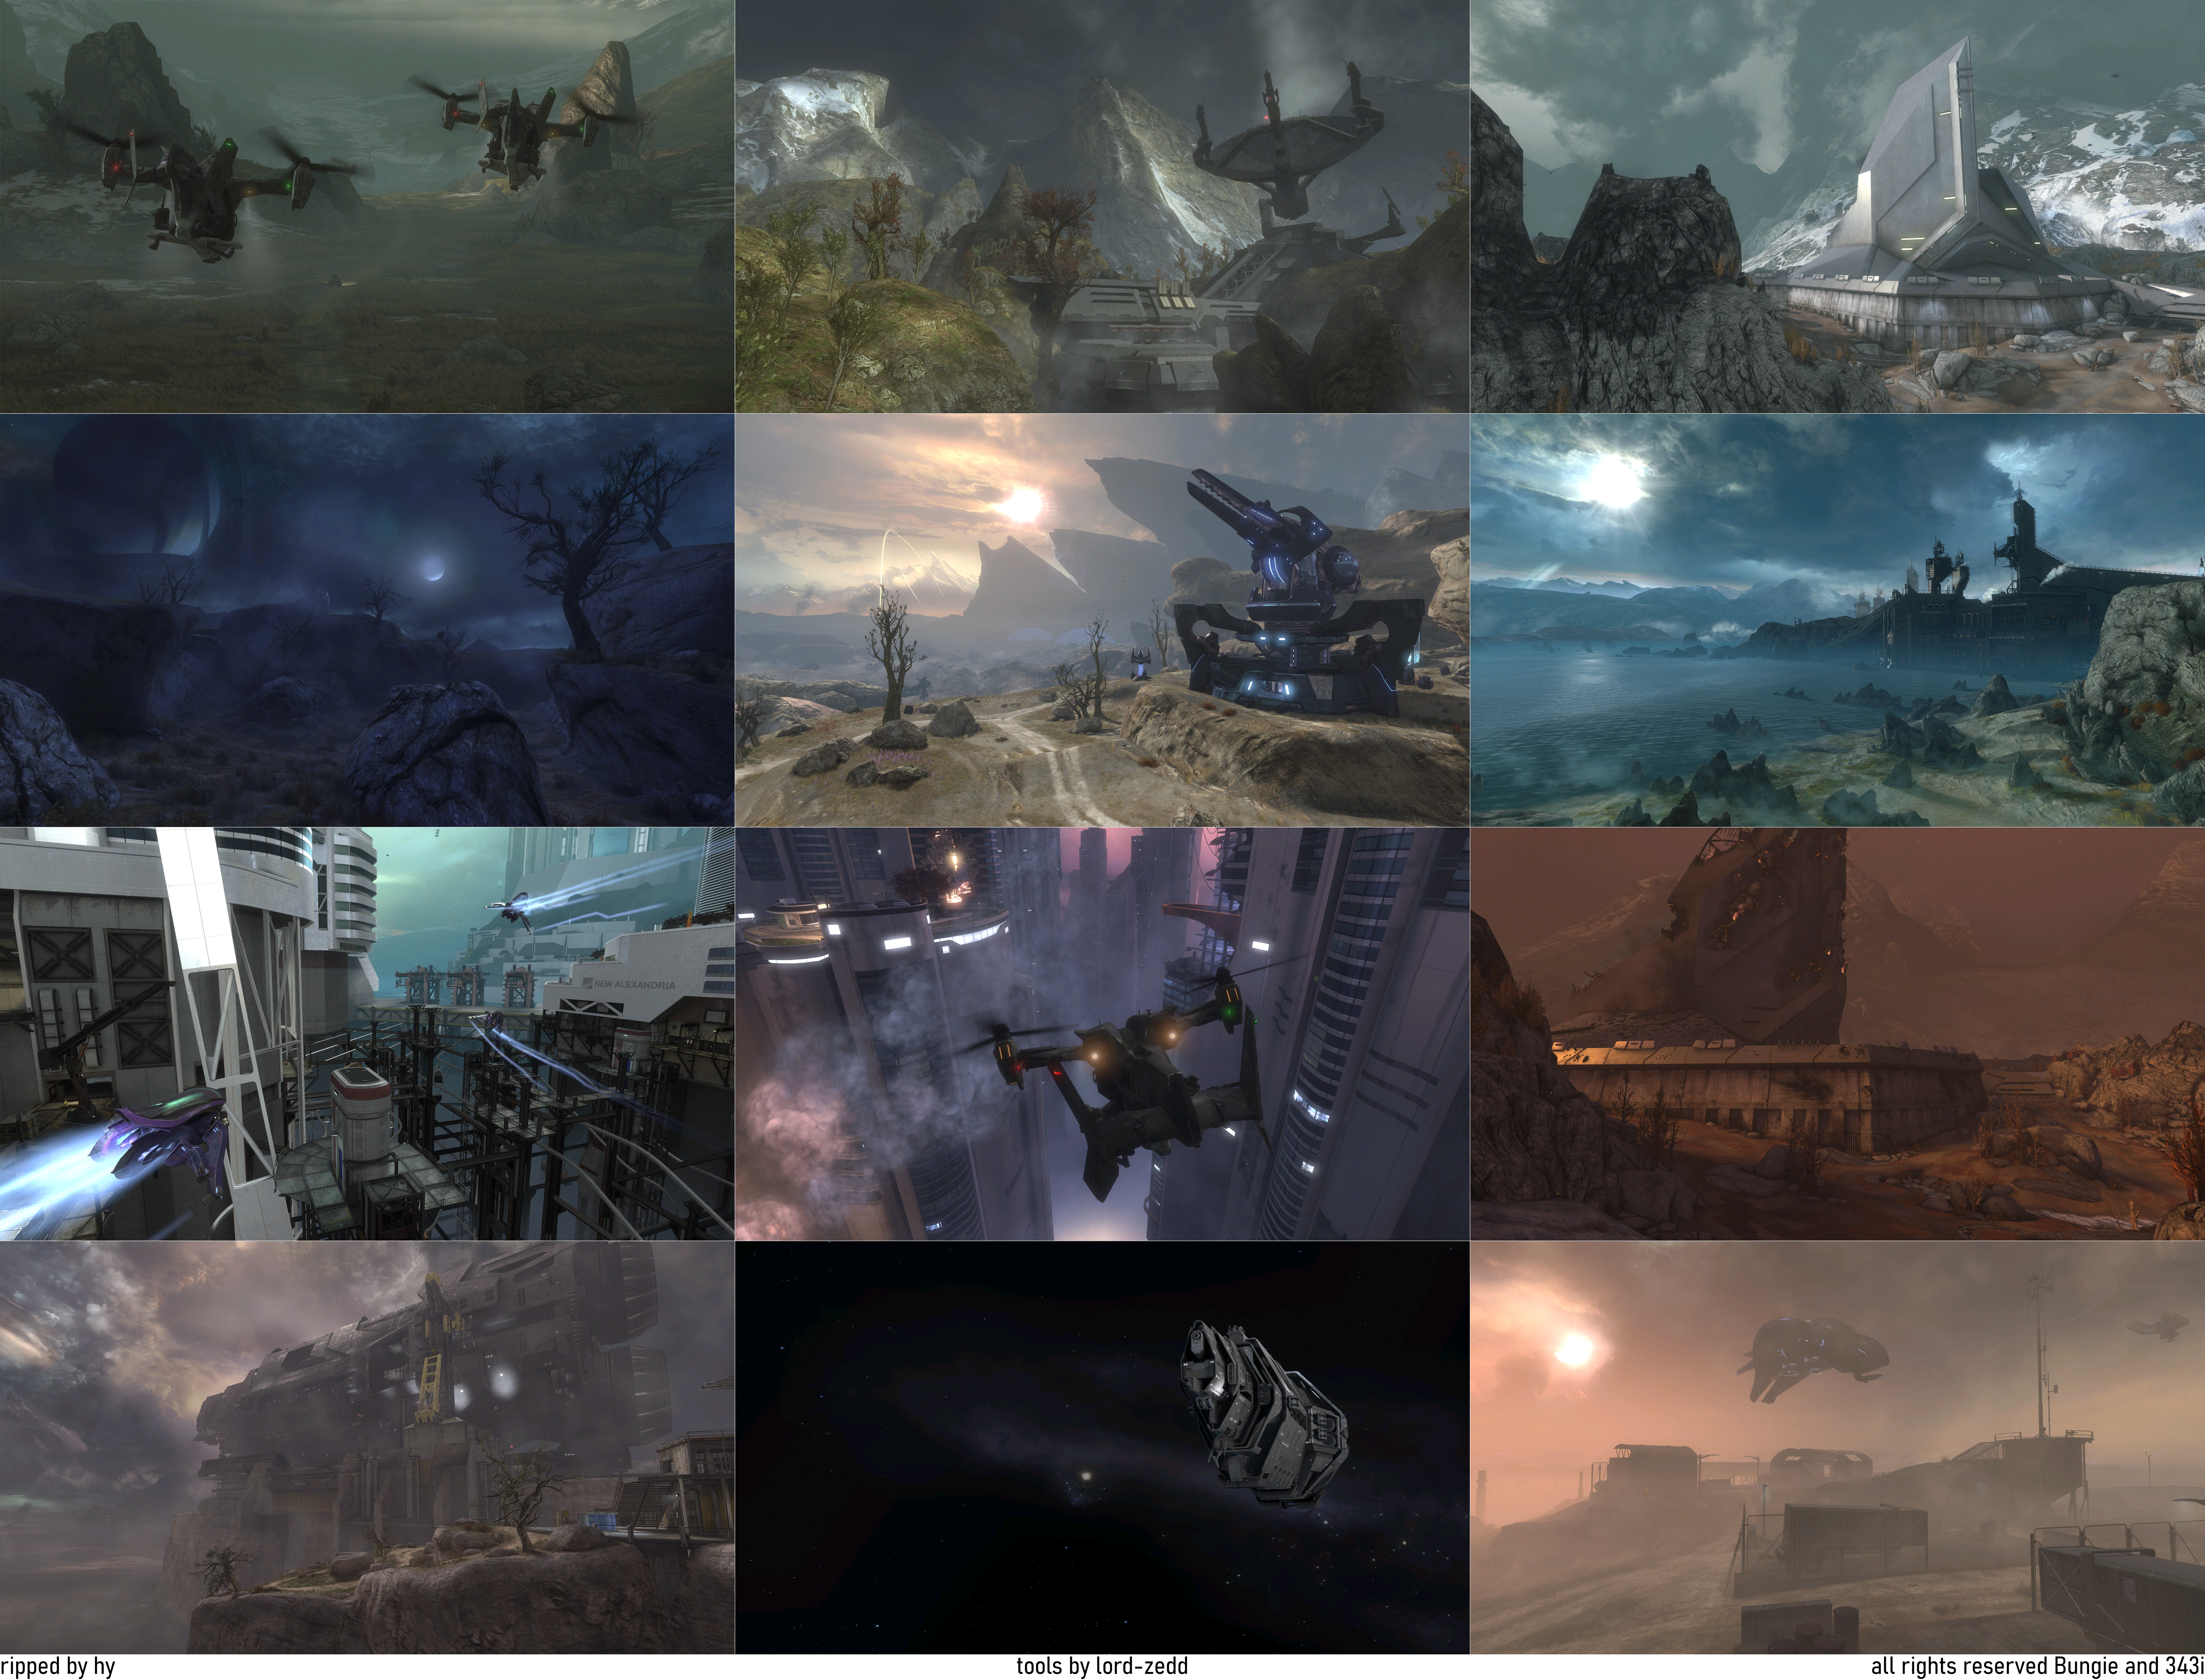 Halo: The Master Chief Collection - Halo: Reach Campaign Level Loading Screens